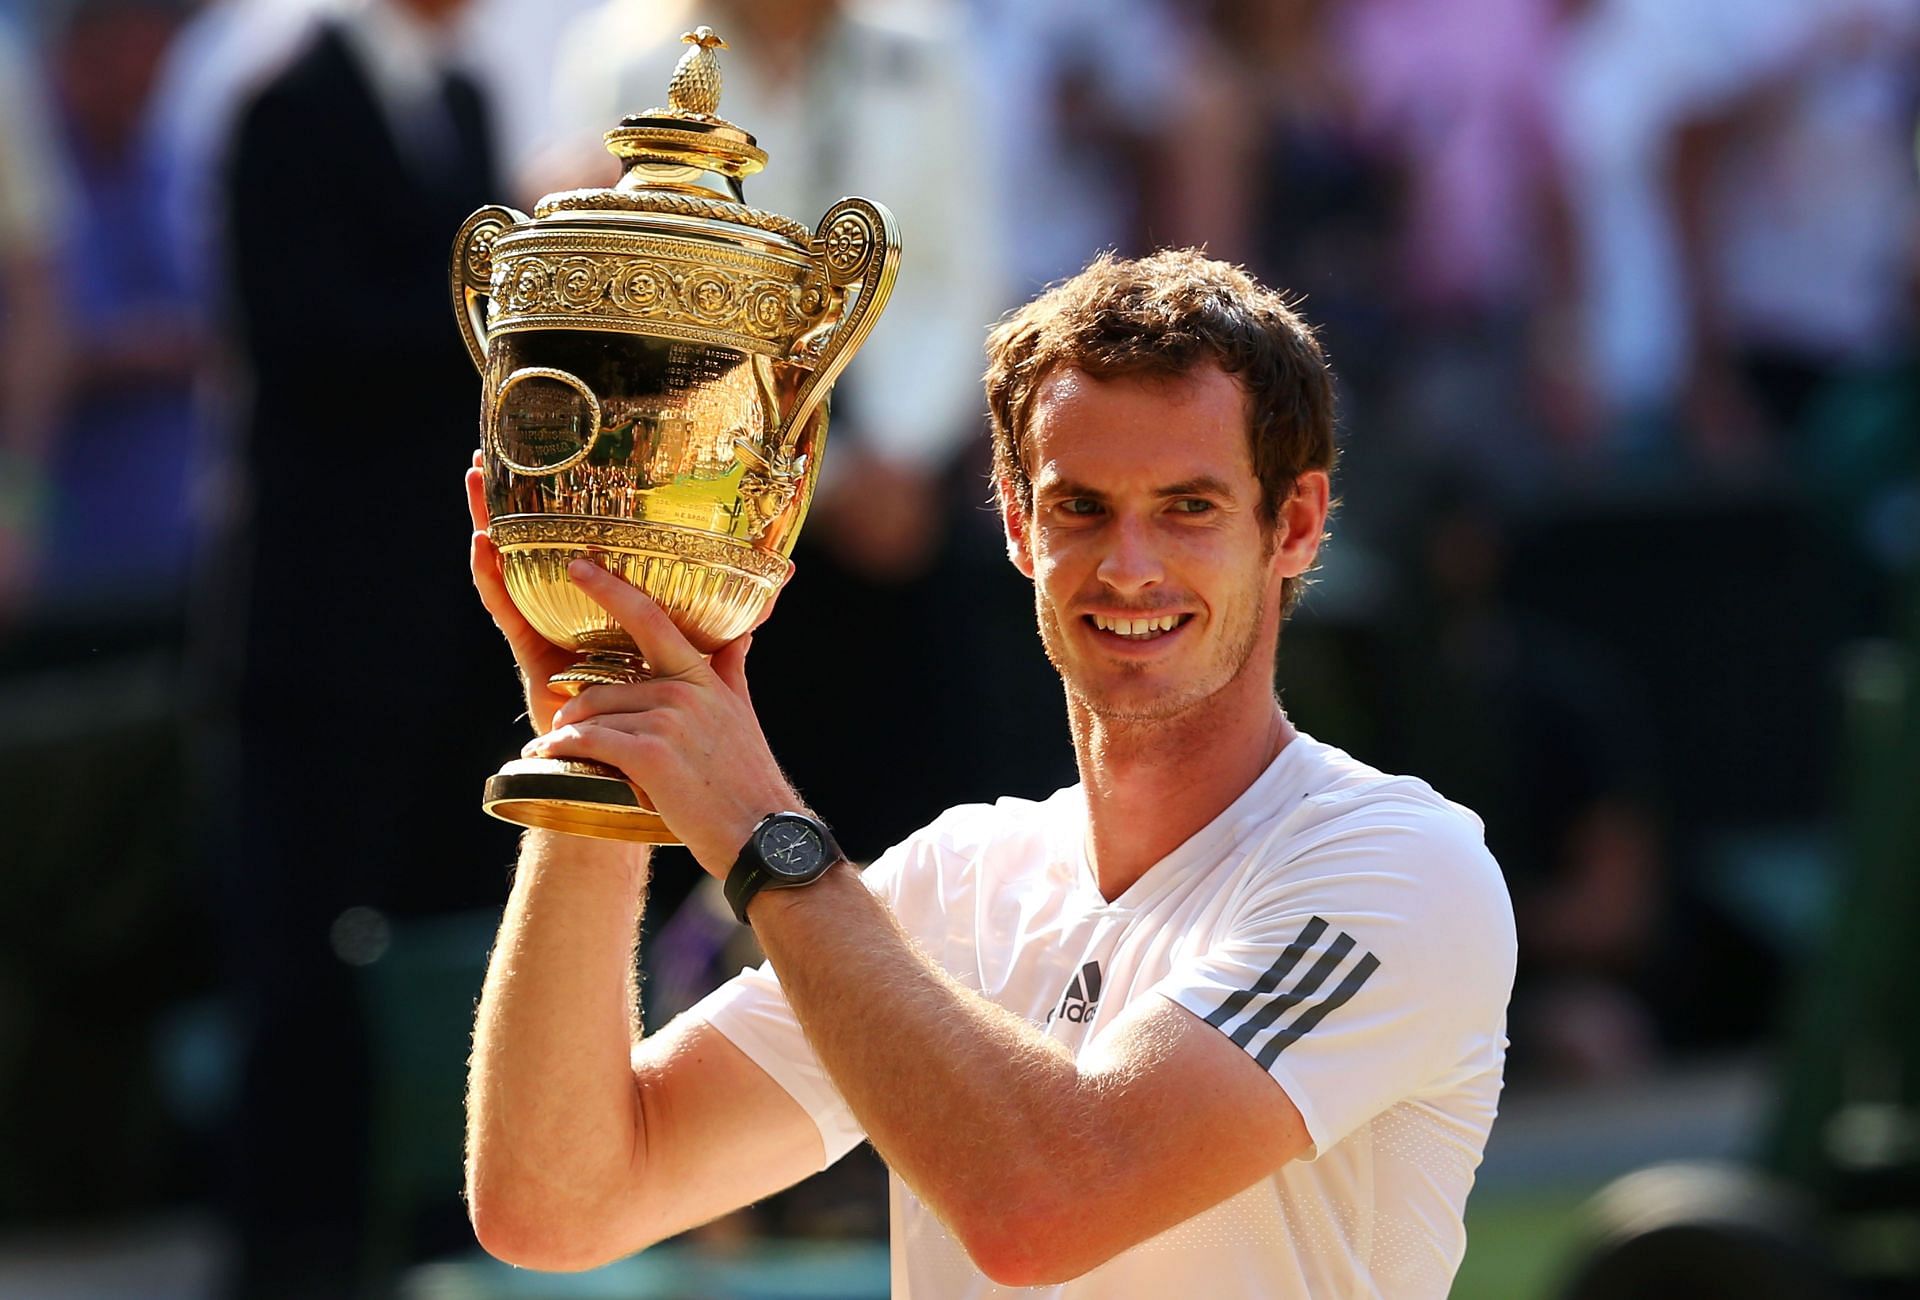 Andy Murray has the second-most wins against Djokovic on hardcourt and two wins over Nadal on clay